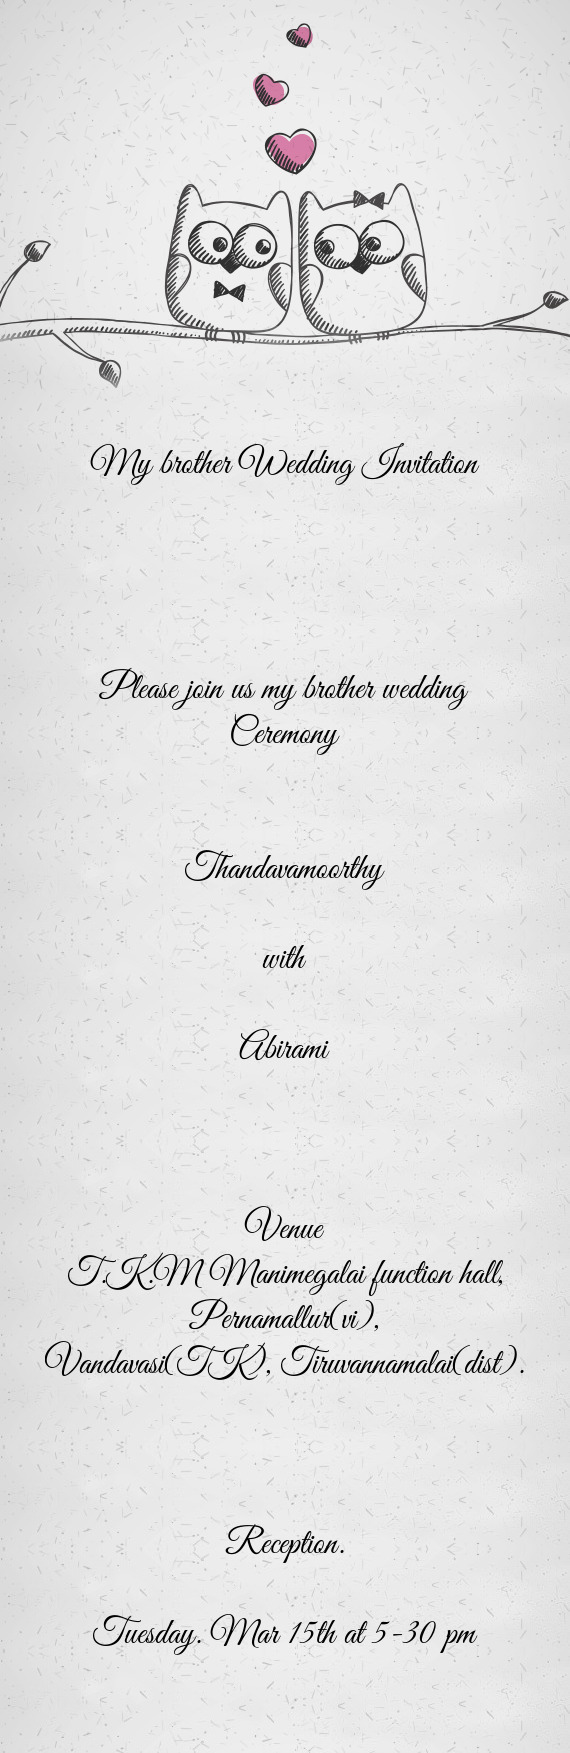 Please join us my brother wedding Ceremony